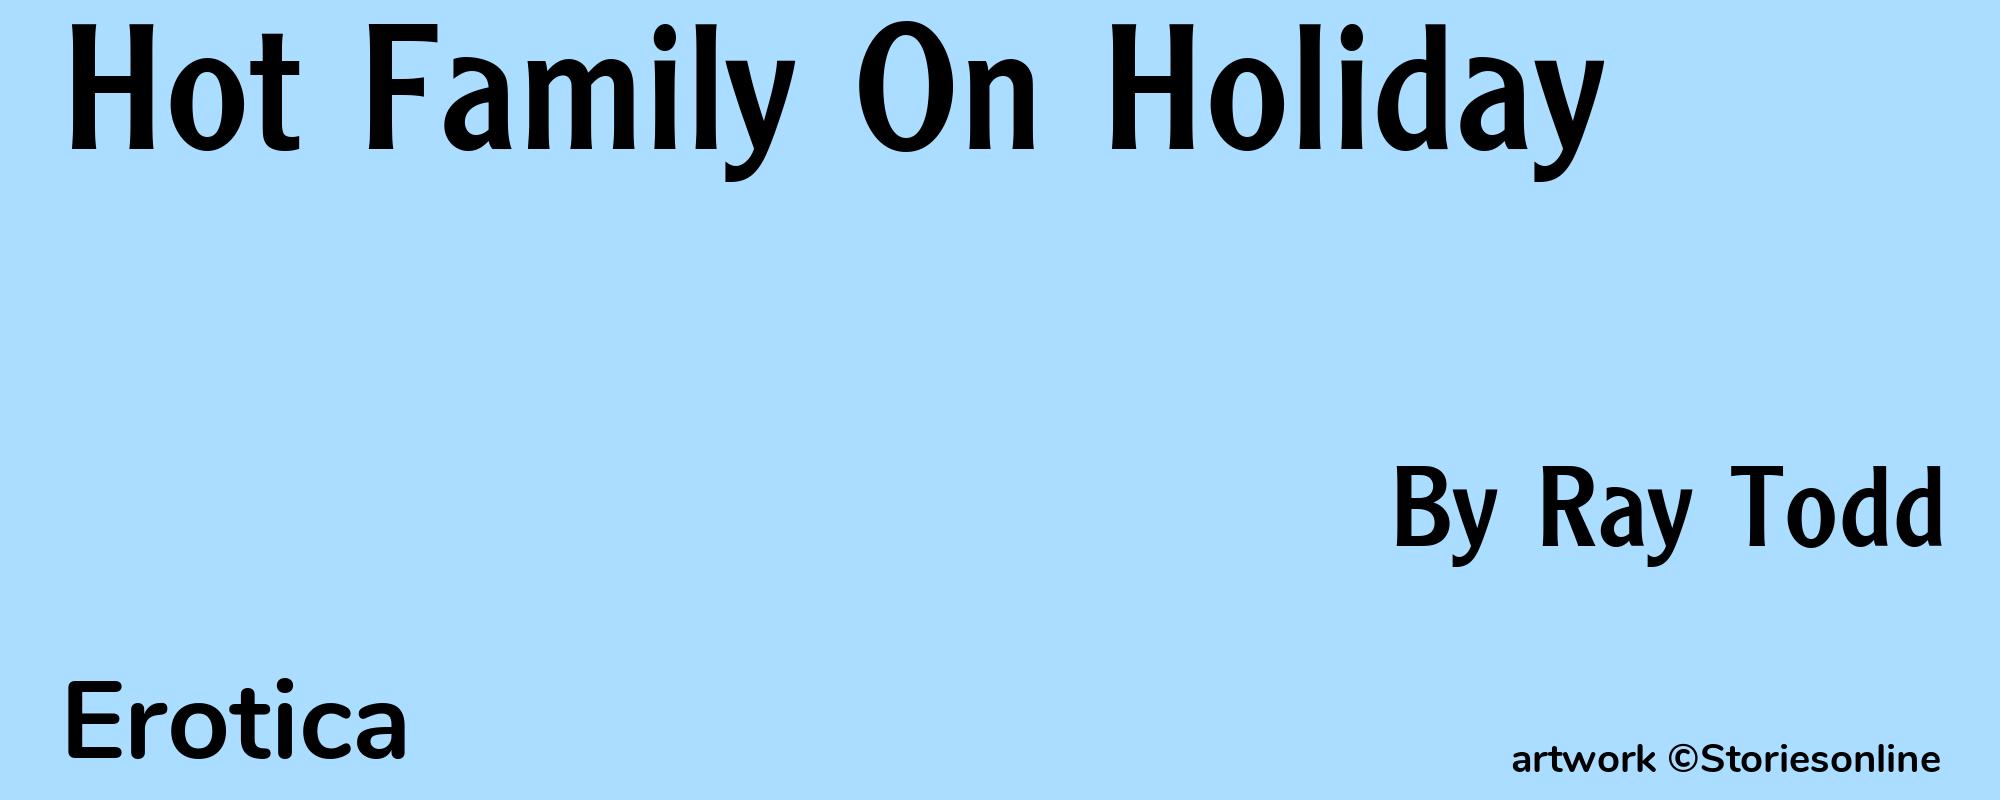 Hot Family On Holiday - Cover